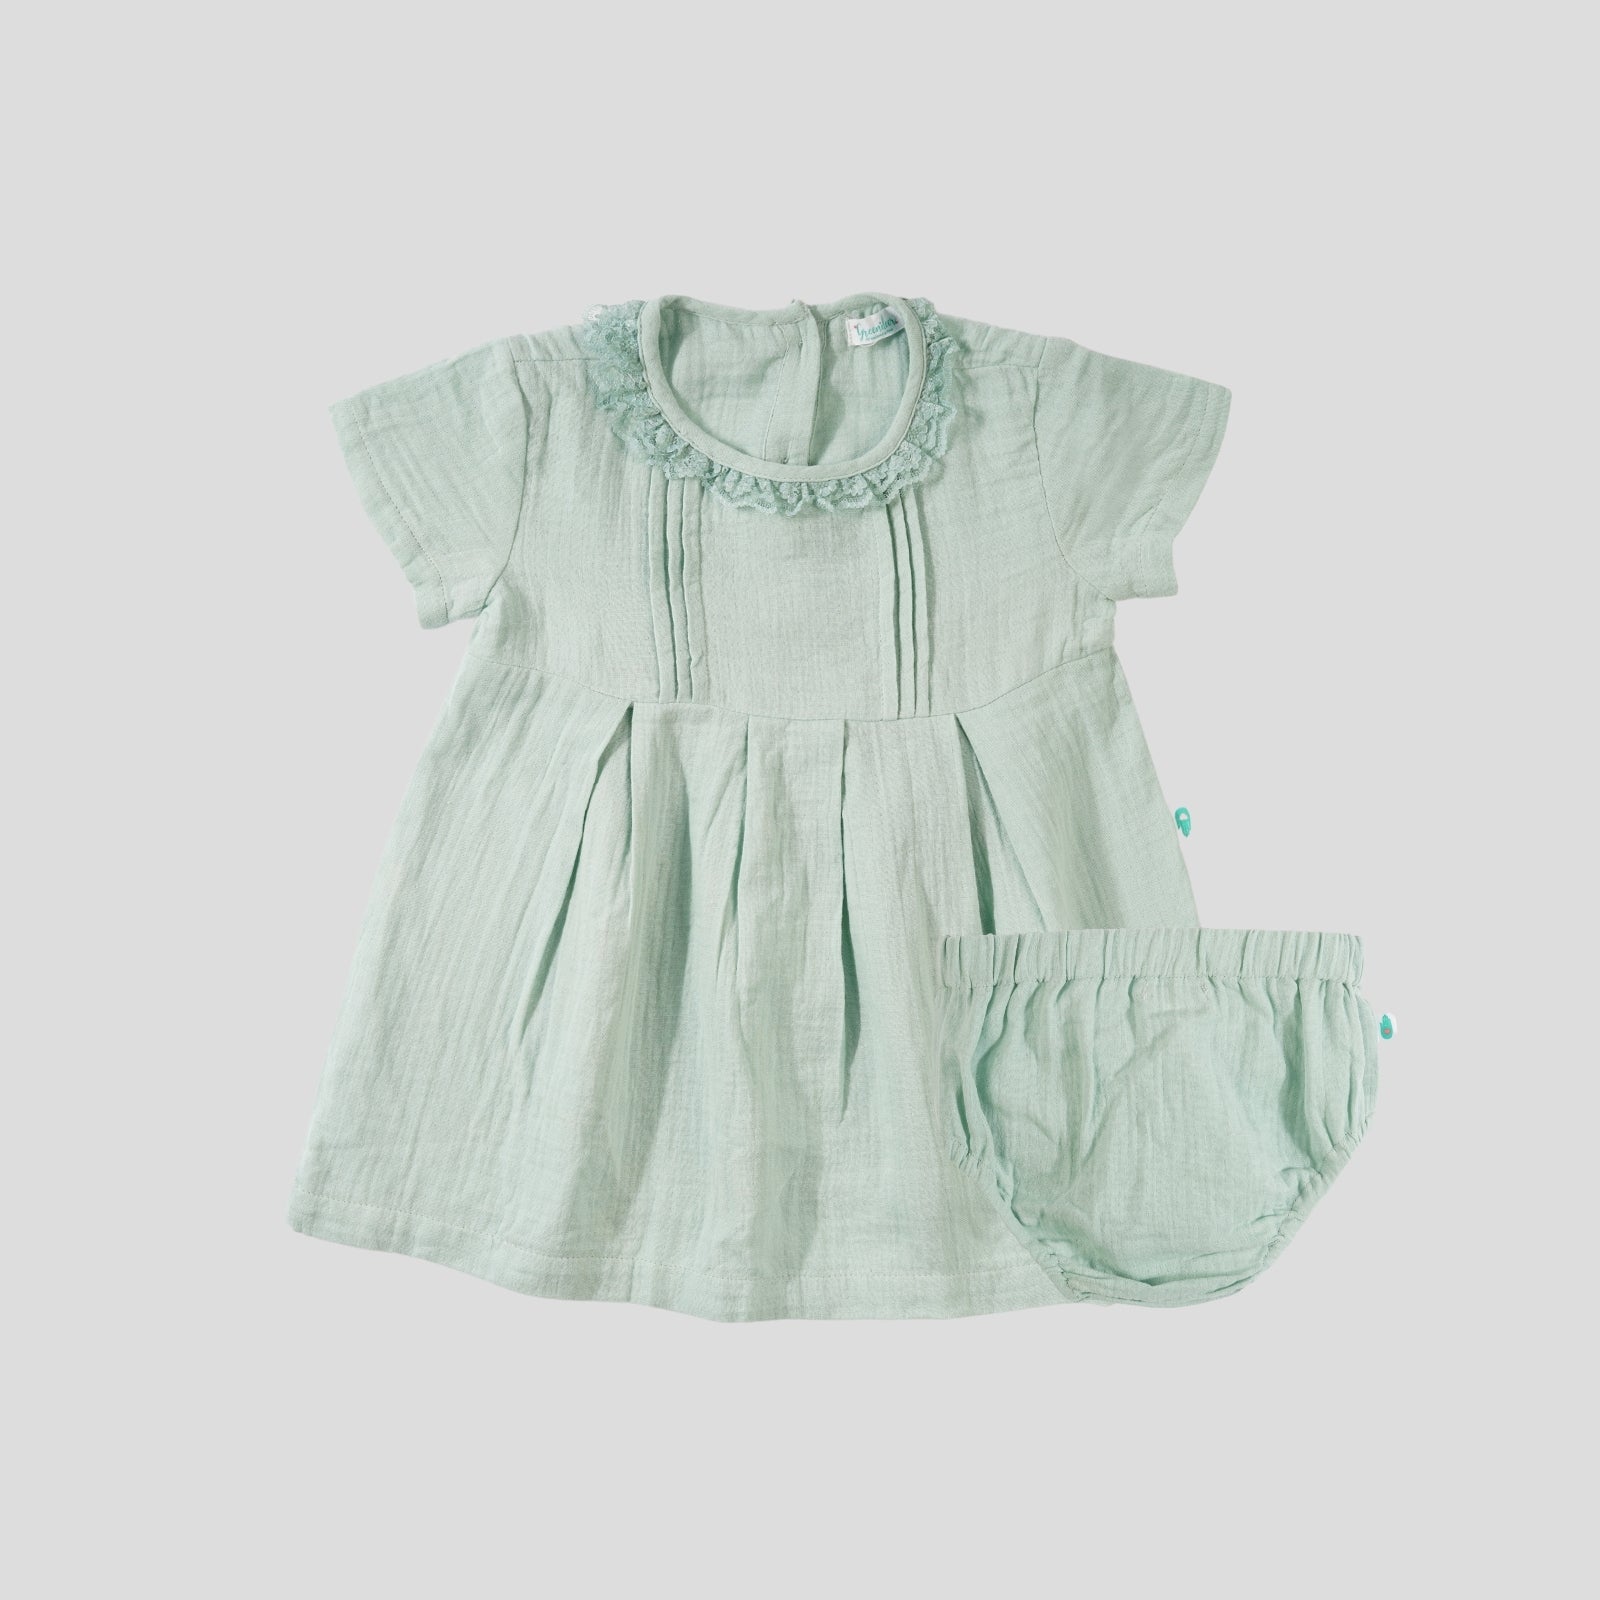 Greendeer Mint Pleated Cotton Frock with Bloomer